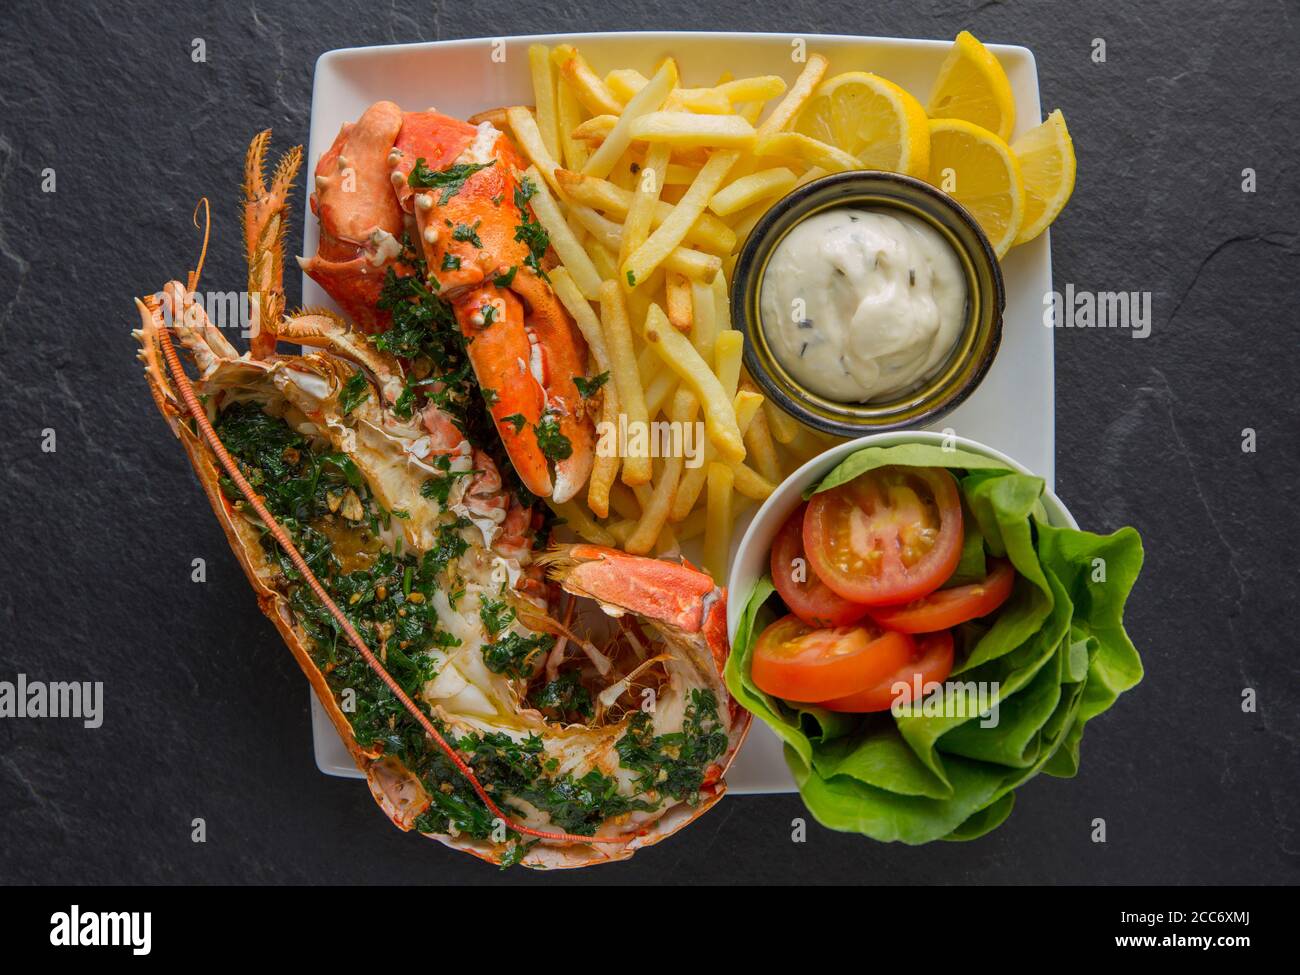 A half lobster, Homarus gammarus, that has been grilled and drizzled with a butter, garlic and parsley sauce and served with chips and salad. The lobs Stock Photo